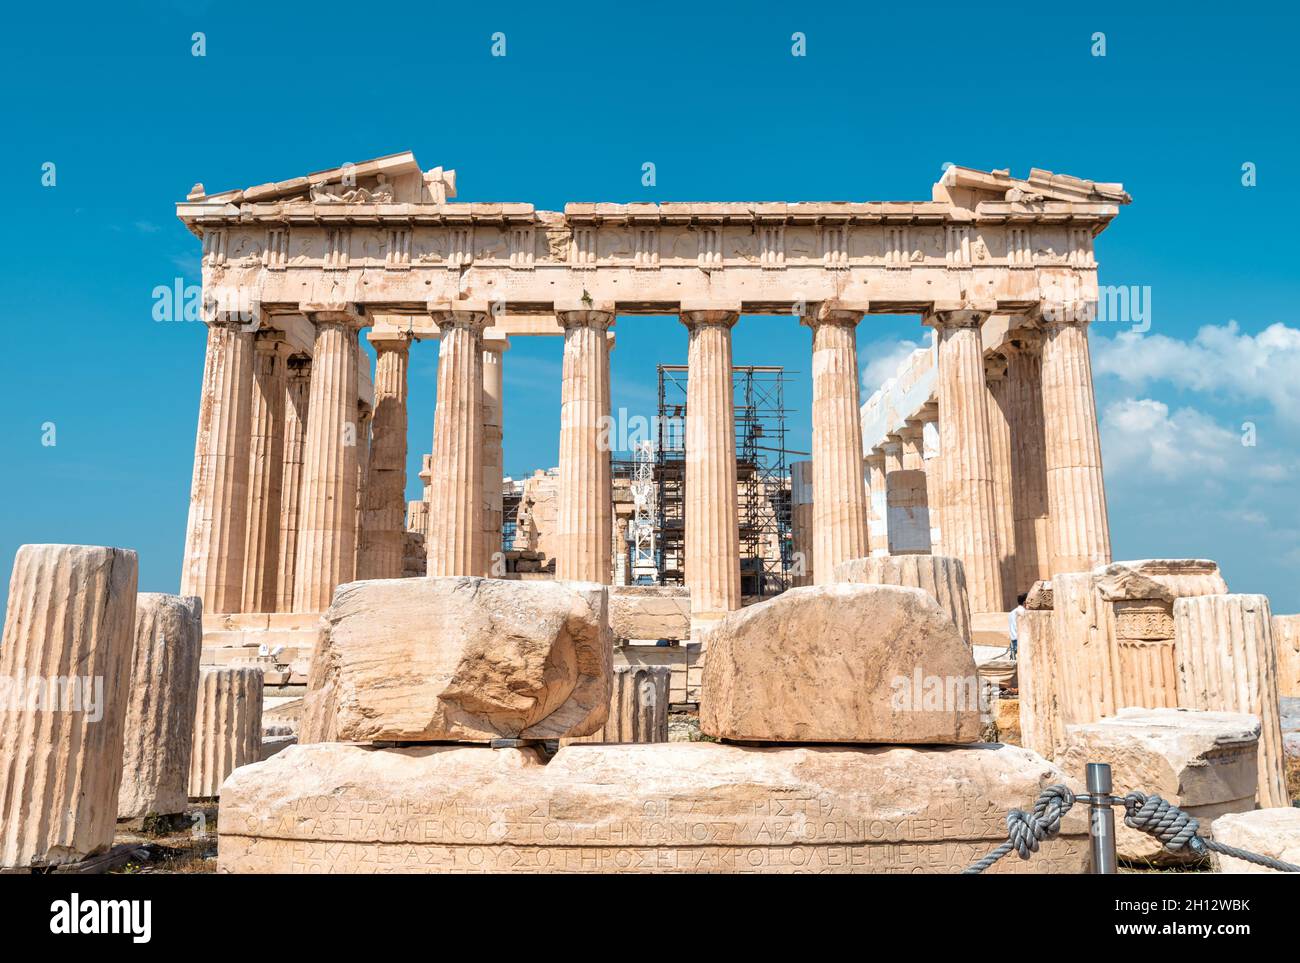 Parthenon on Acropolis, Athens, Greece. It is famous tourist attraction of Athens. Ruins of classical temple of Athens on top of Acropolis hill. Ancie Stock Photo